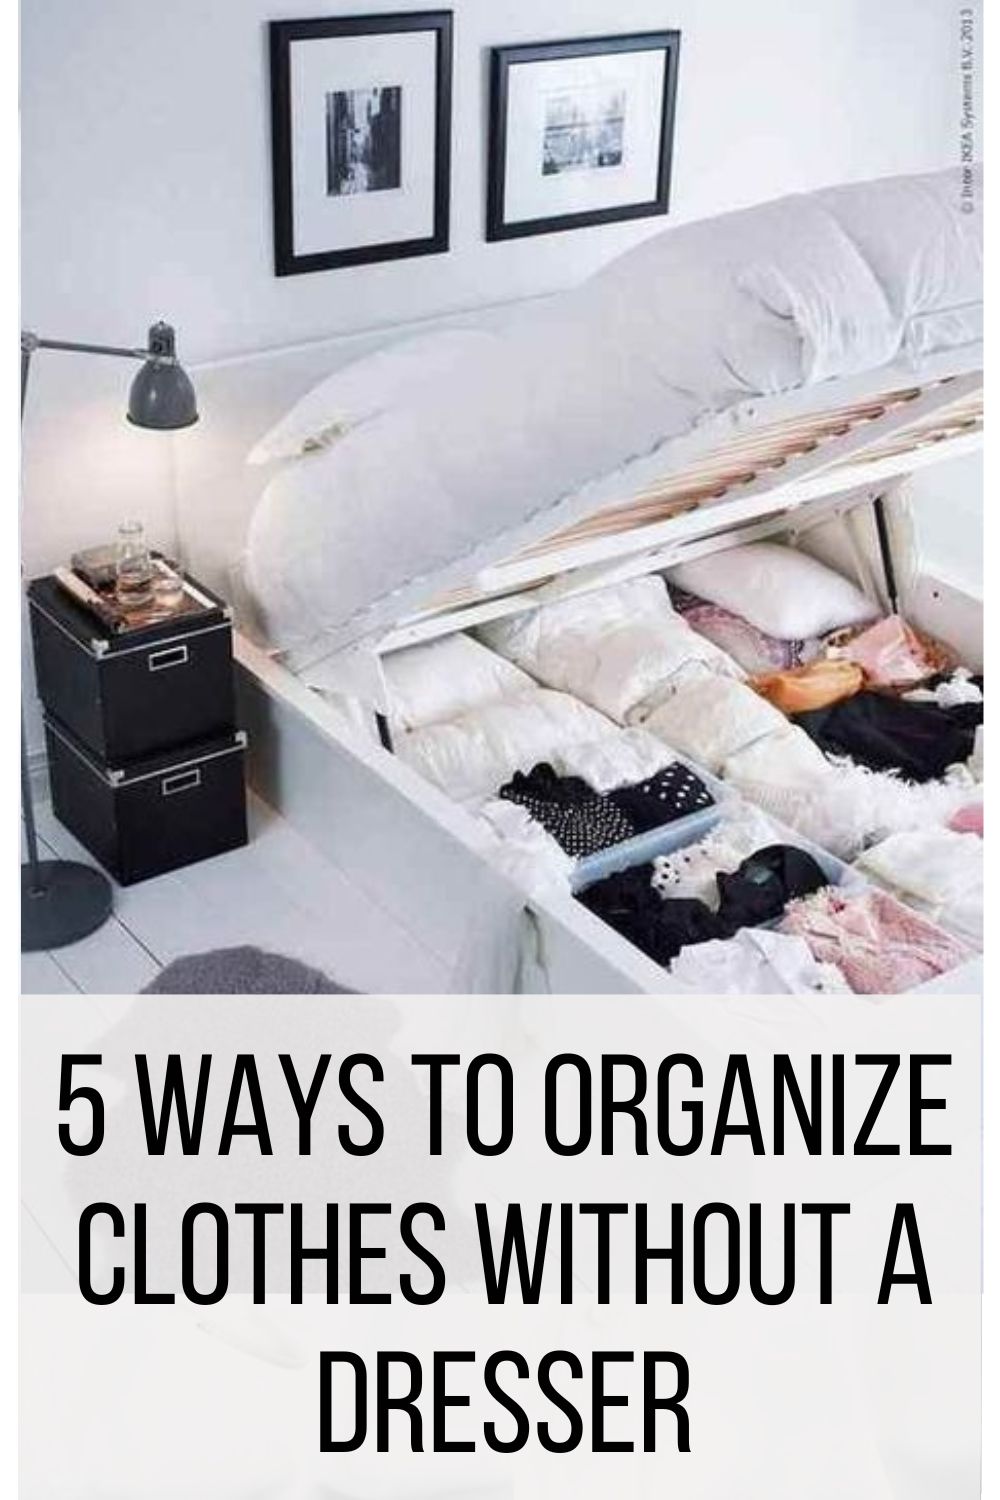 5 Ways to Organize Clothes Without a Dresser